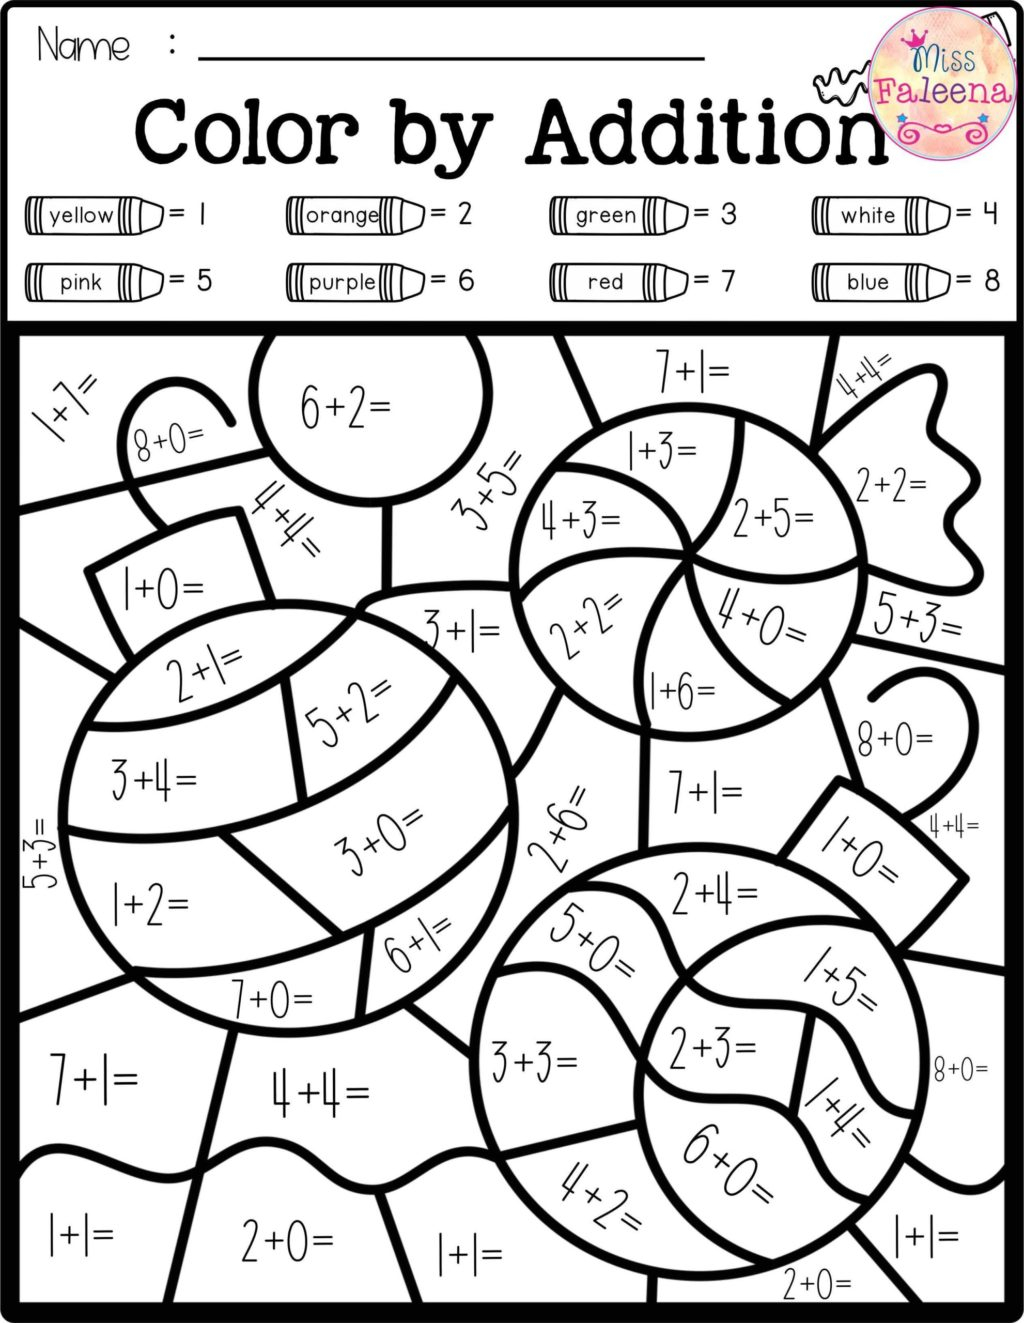 Worksheet ~ Digit Addition And Subtraction With Regrouping